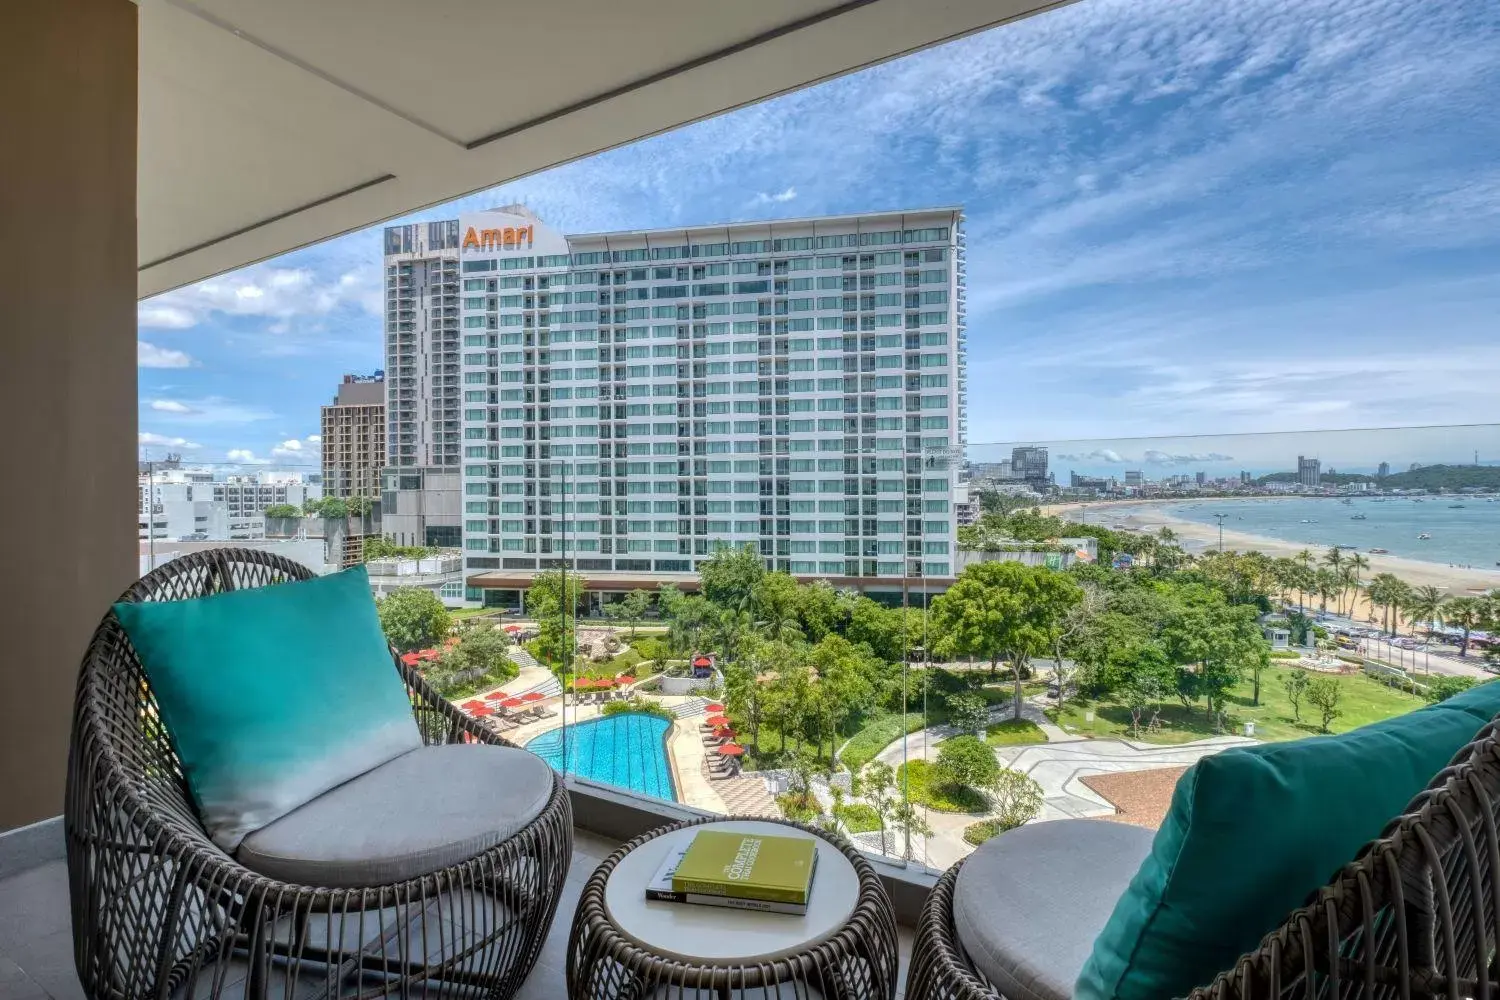 View (from property/room) in Amari Pattaya